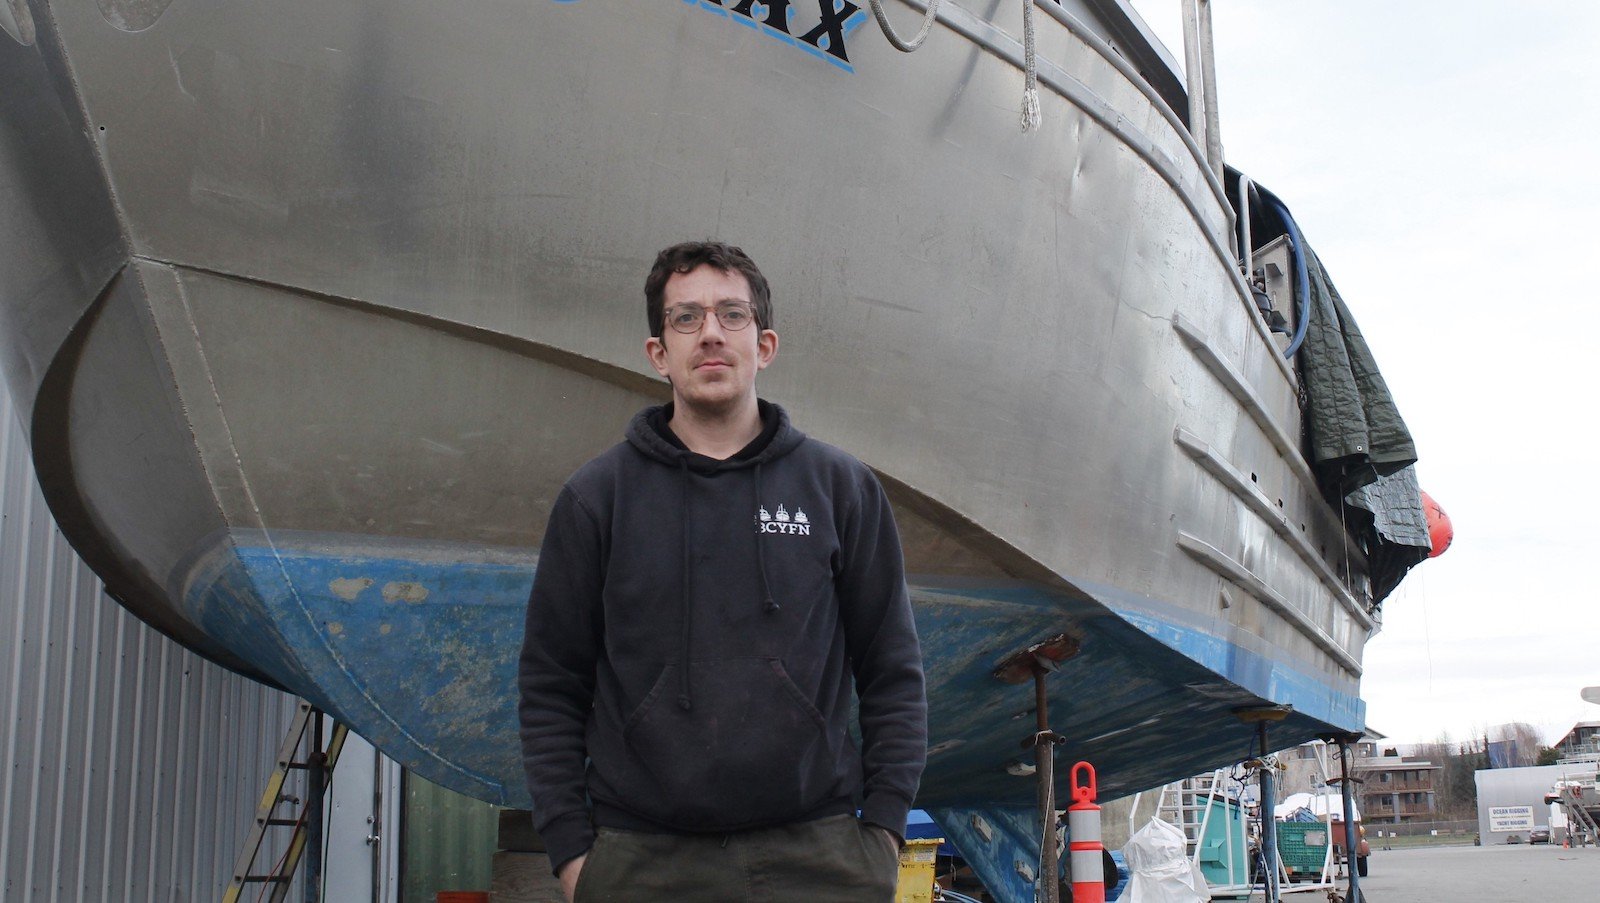 Duncan Cameron has short dark curly hair, light skin and glasses. He is wearing a black hoodie and standing with his hands in his pockets in front of a fishing boat on standers in parking lot. 